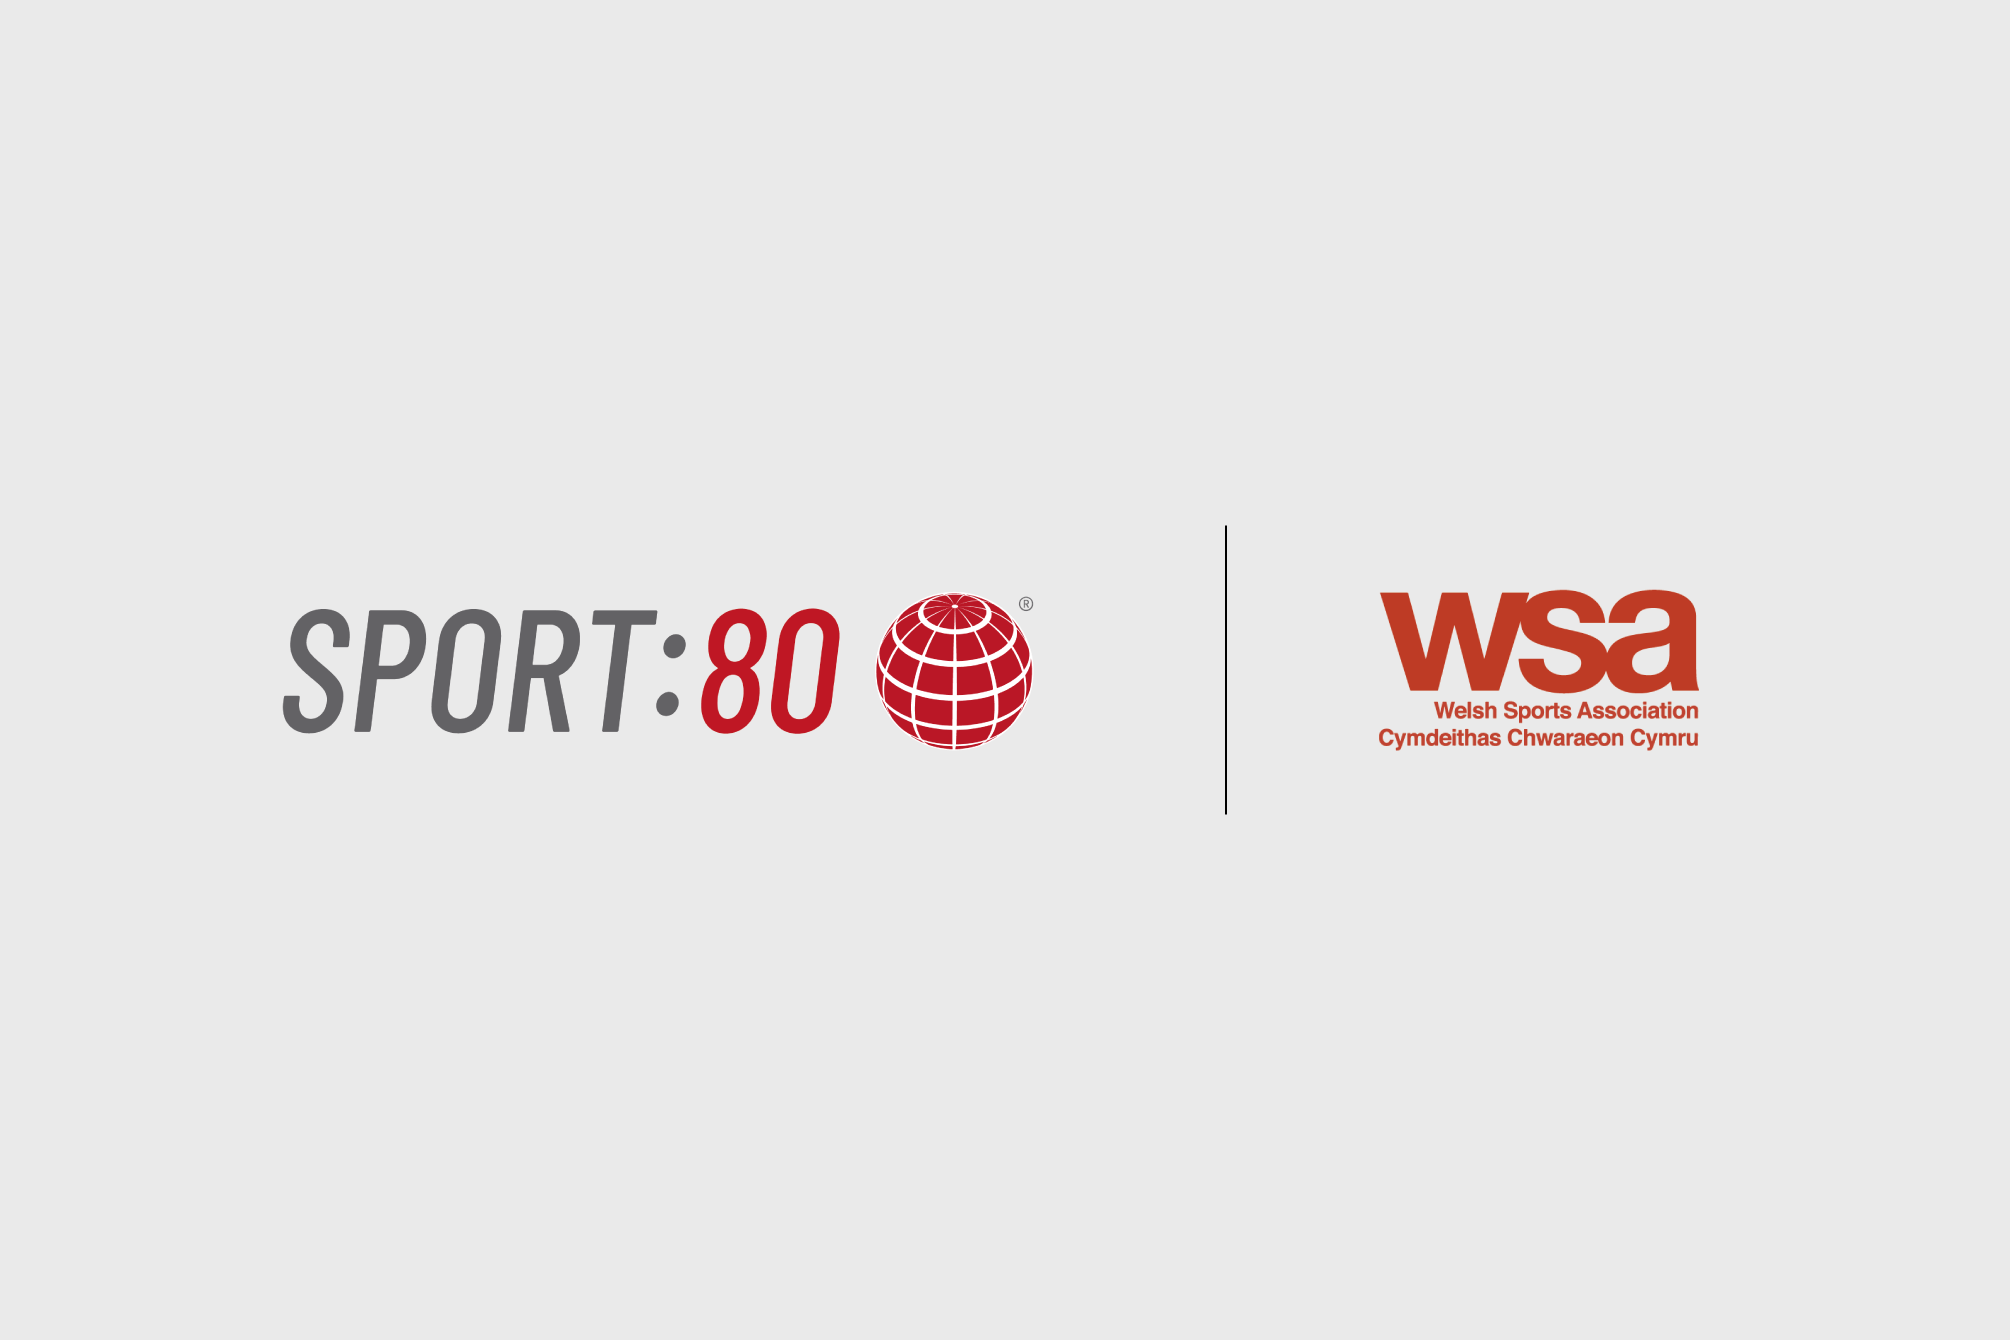 Welsh Sports Association partnership renewed to continue supporting Welsh NGBs